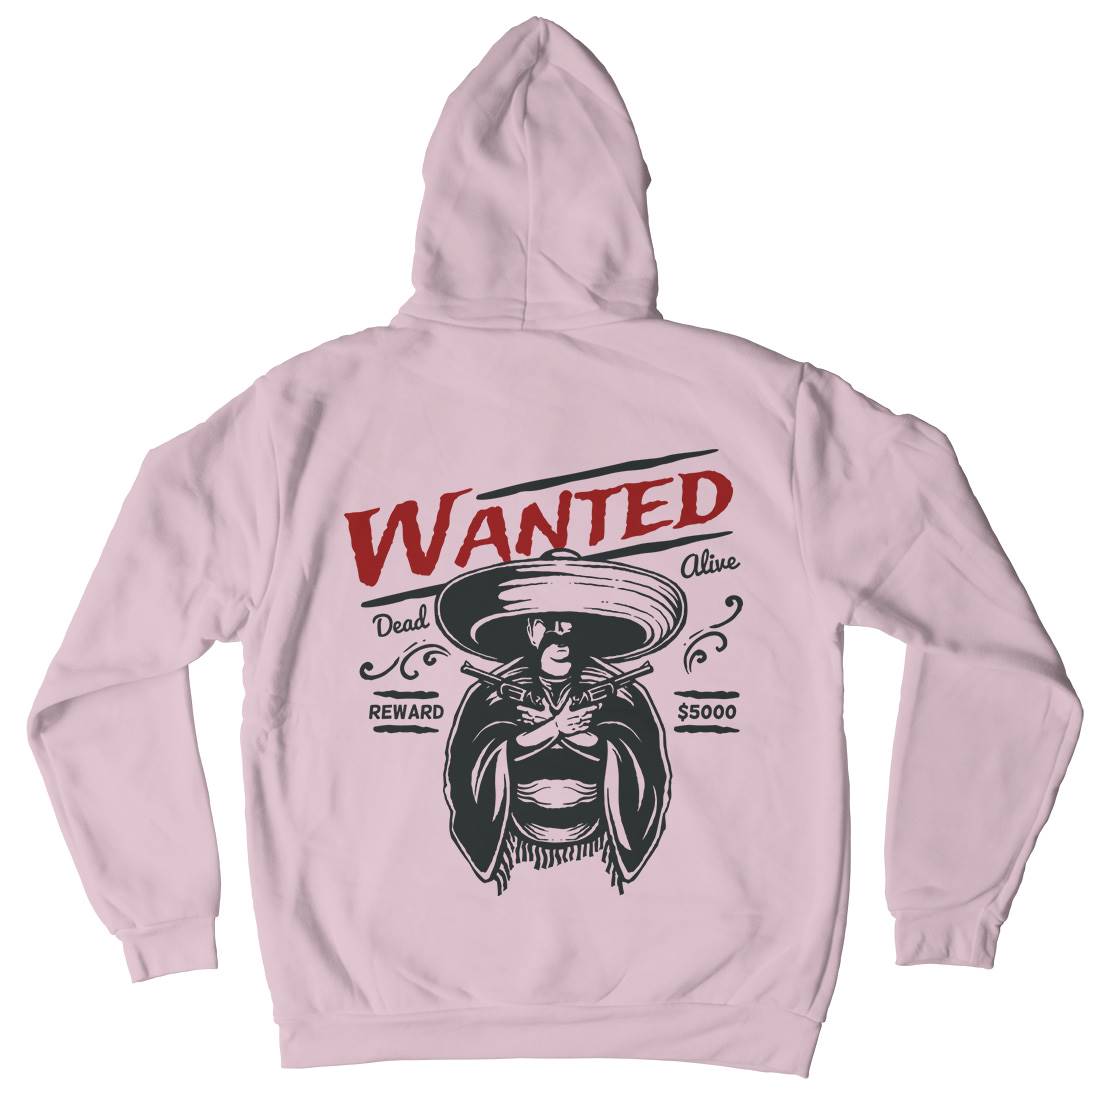 Wanted Kids Crew Neck Hoodie American A391